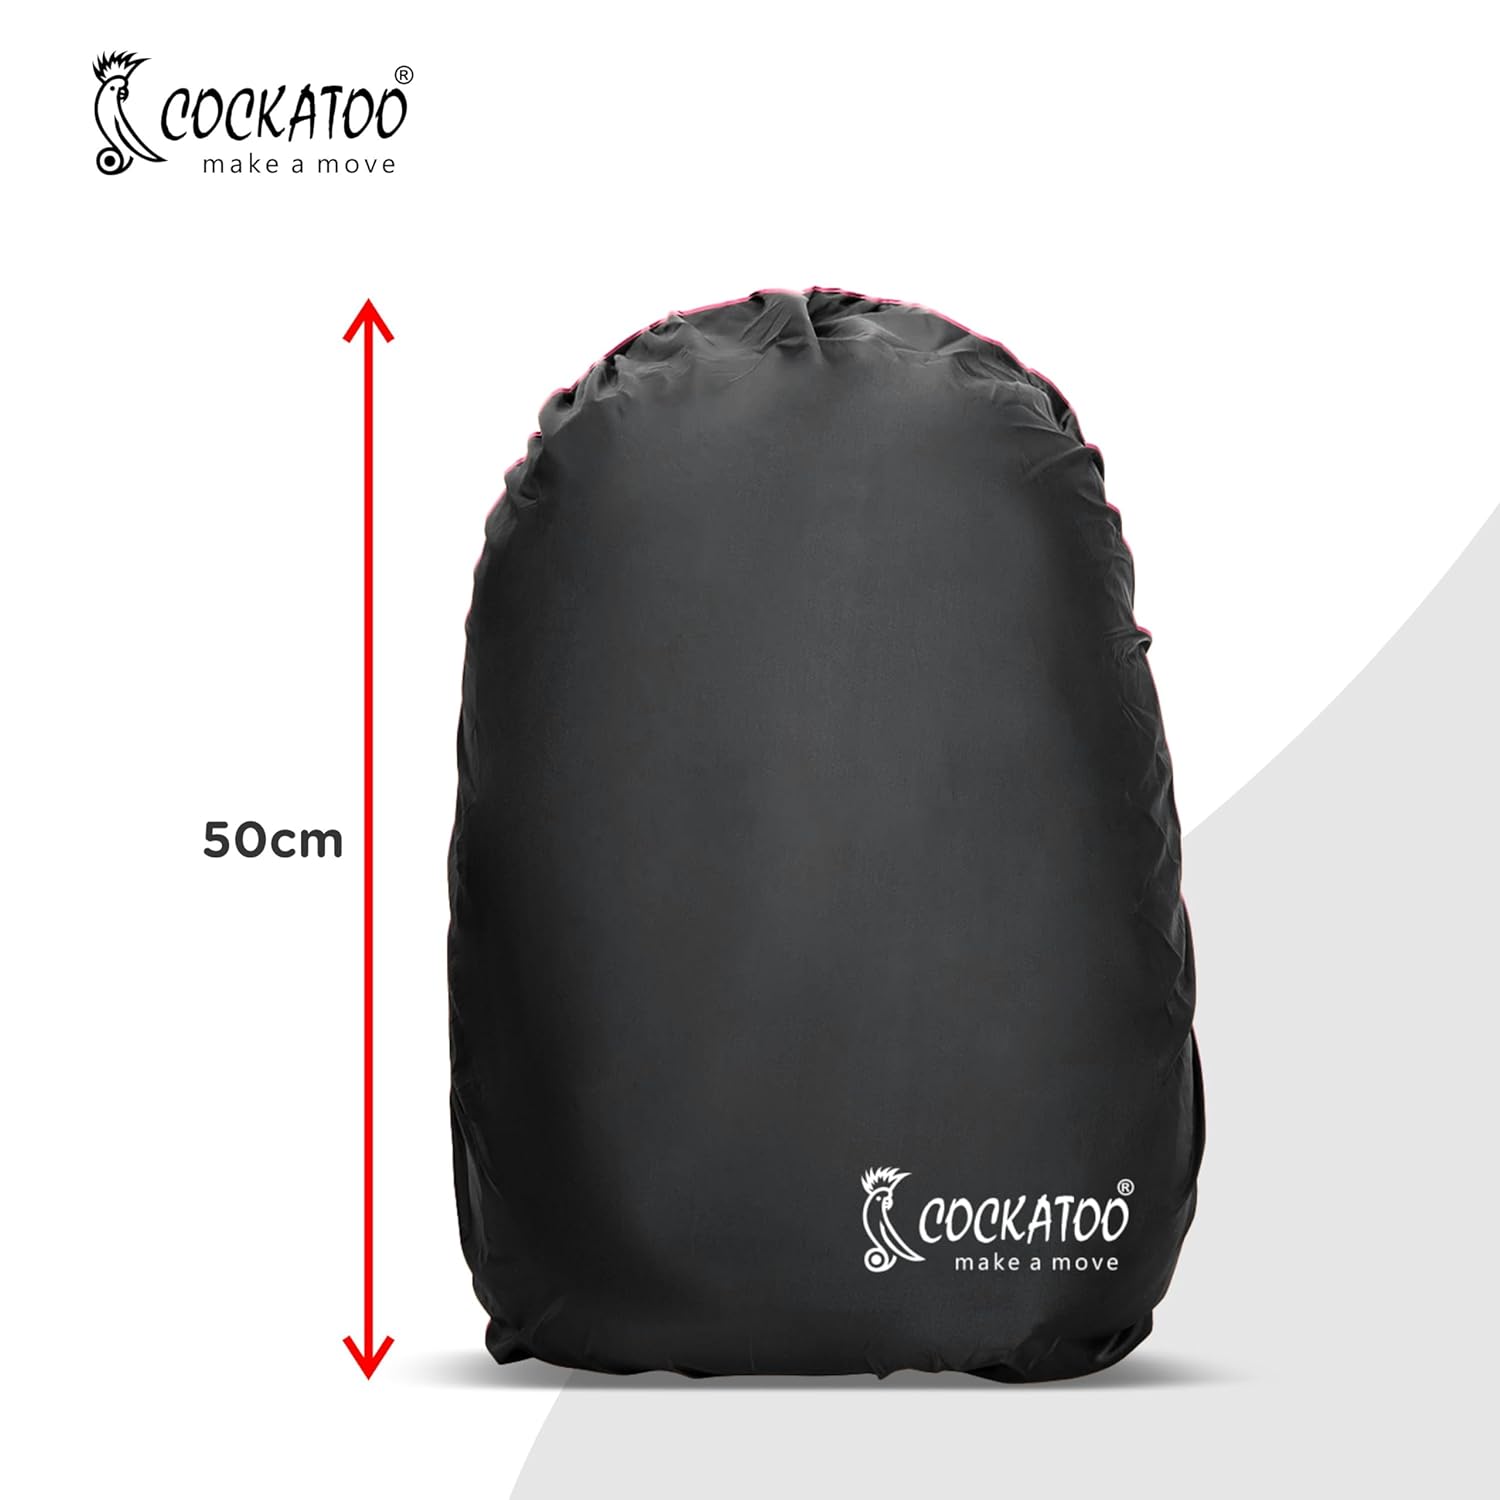 Cockatoo Bag Cover for Back Pack,40L Bag Cover Waterproof, Bag Cover for  Rain & Dust(6 Month Warranty)